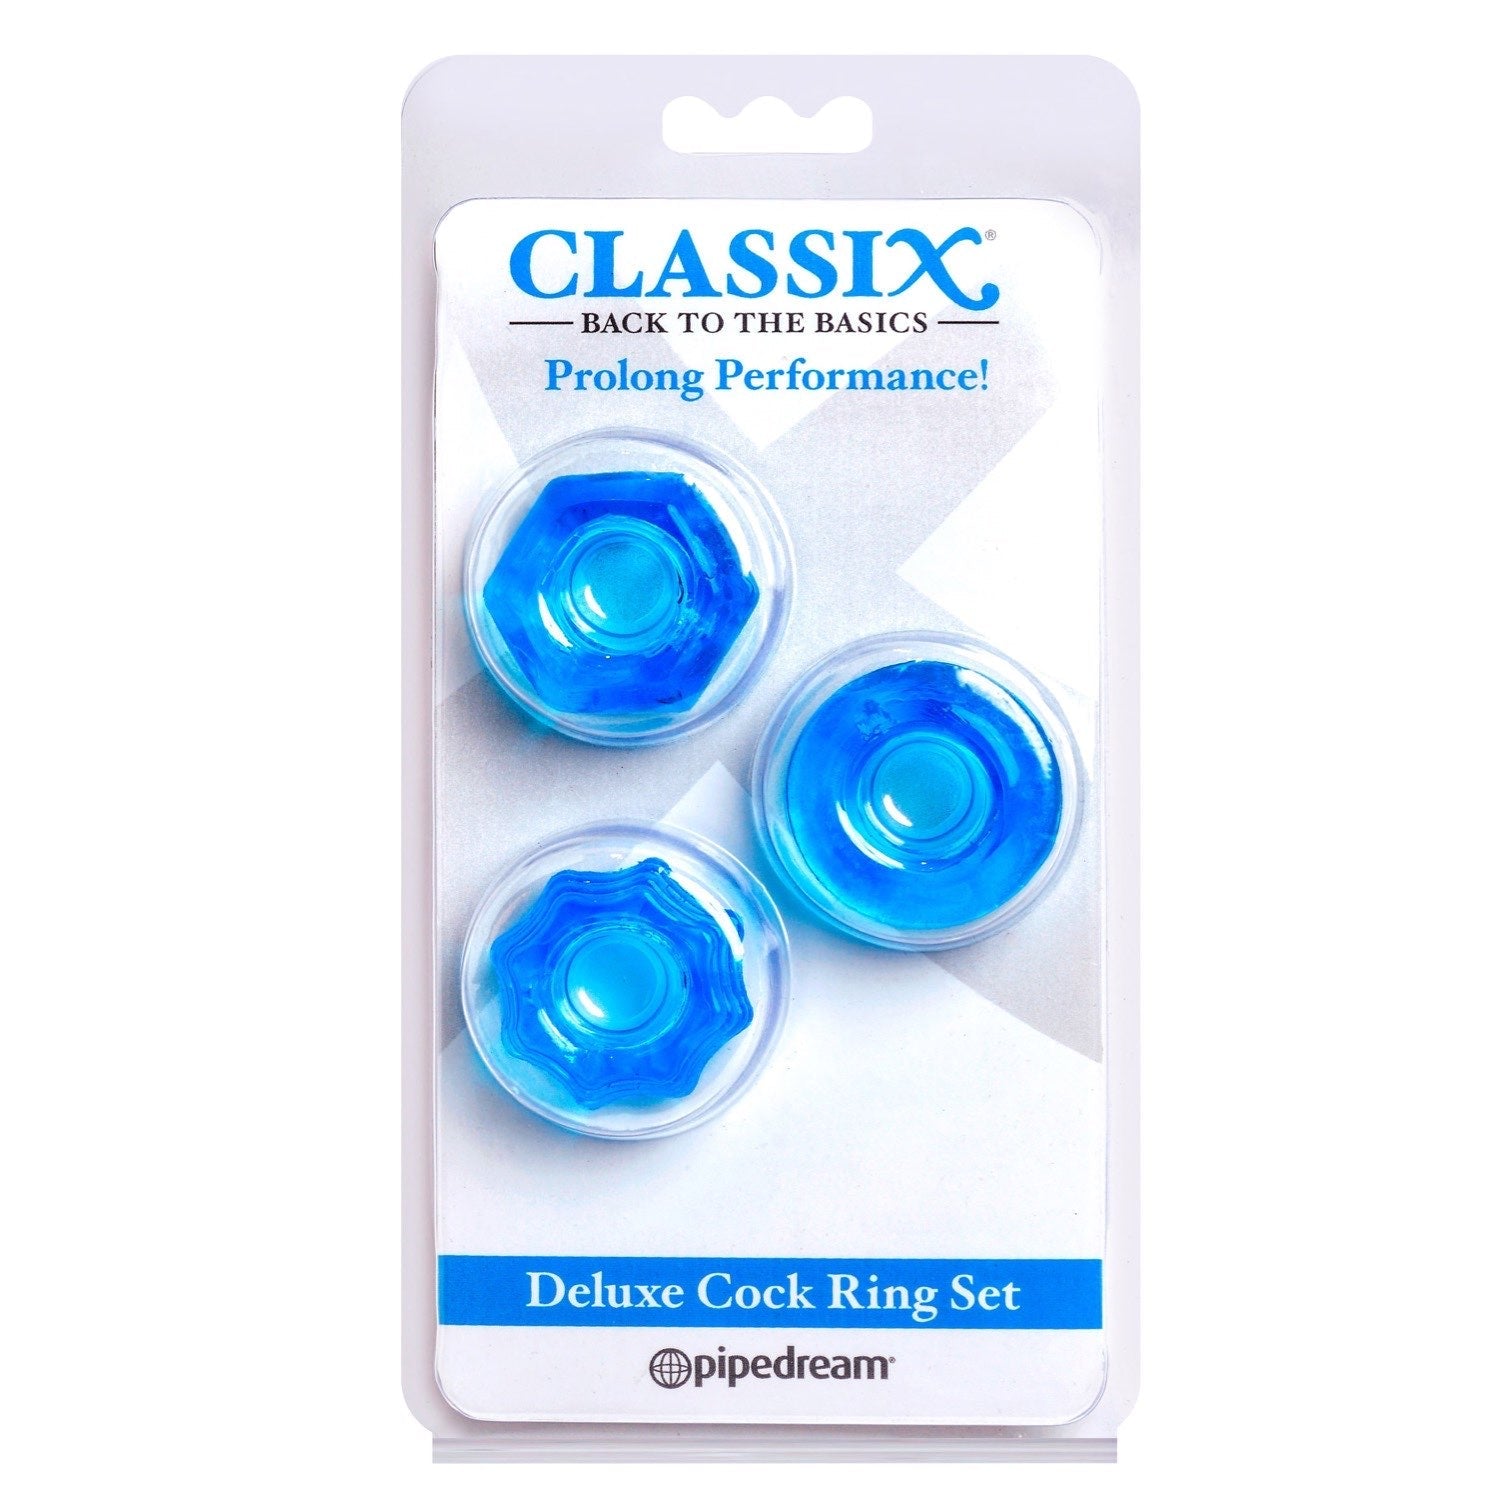 Classix Deluxe Cock Ring Set - Blue Cock Rings - Set of 2 by Pipedream